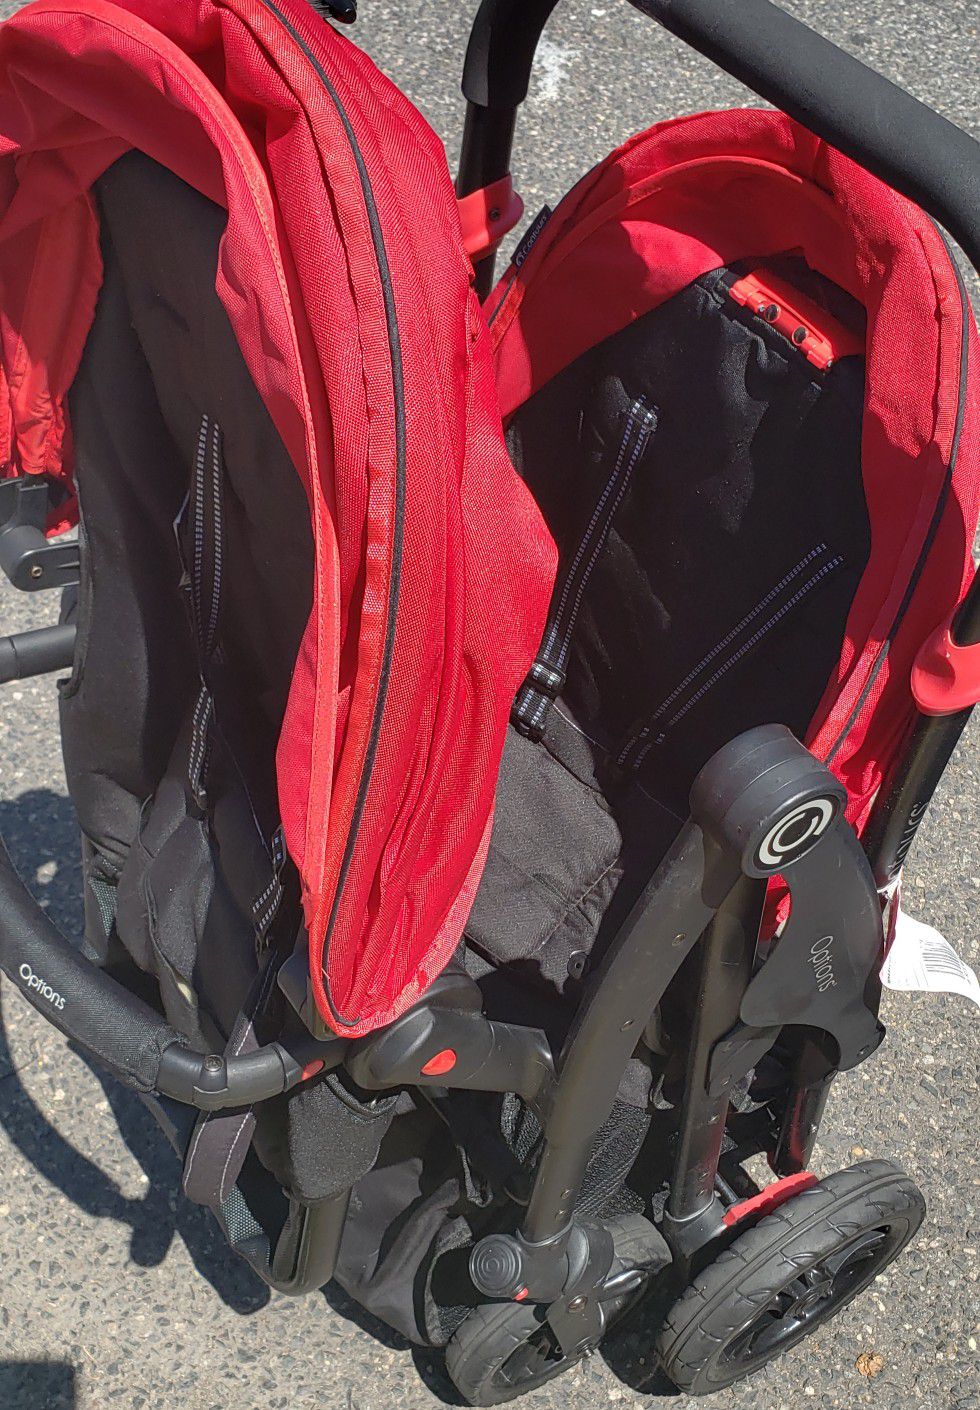 double stroller great condition.